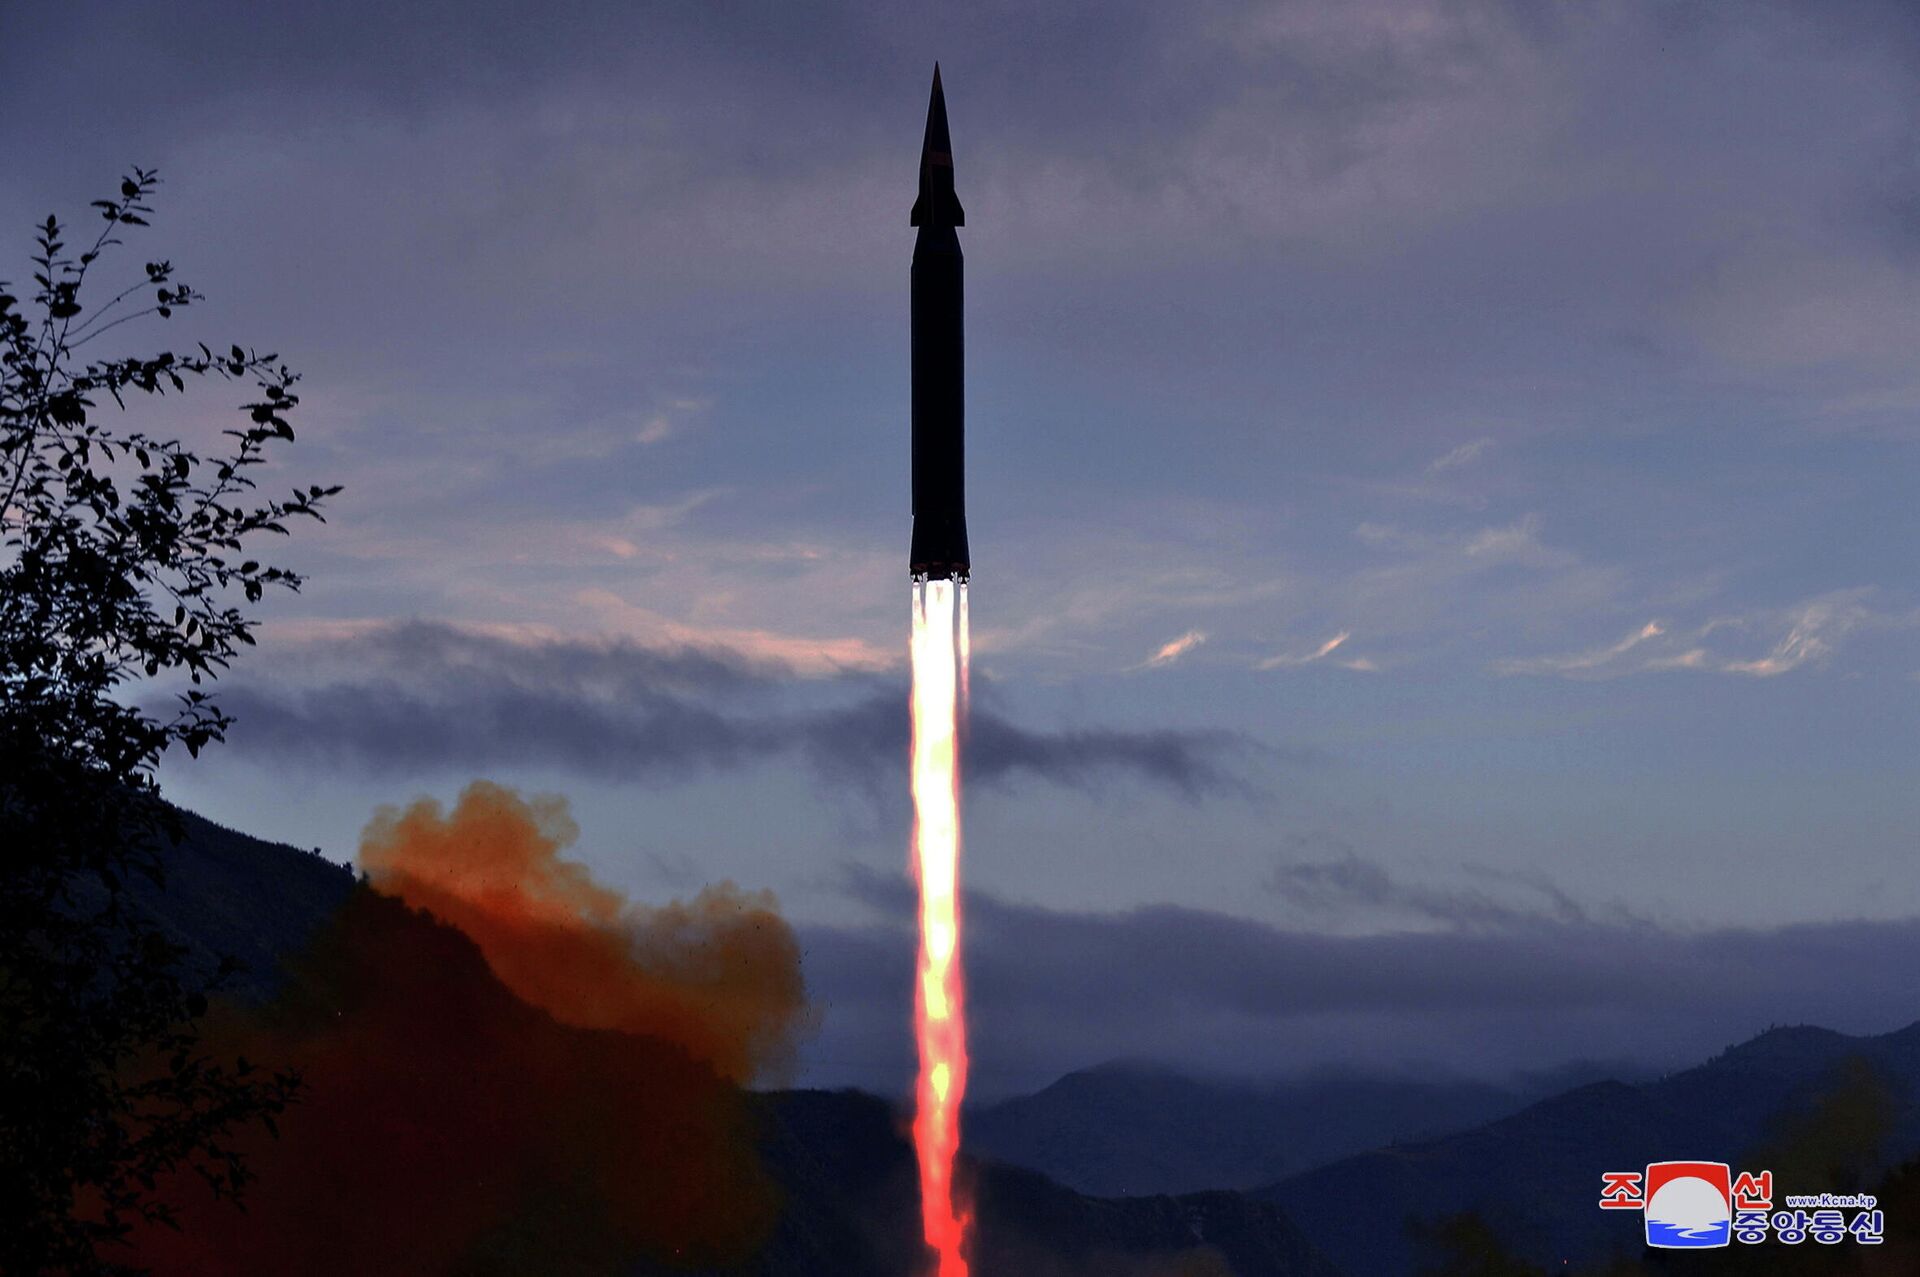 The newly developed hypersonic missile Hwasong-8 is test-fired by the Academy of Defence Science of the DPRK in Toyang-ri, Ryongrim County of Jagang Province, North Korea, in this undated photo released on September 29, 2021 by North Korea's Korean Central News Agency (KCNA). - Sputnik International, 1920, 29.10.2021